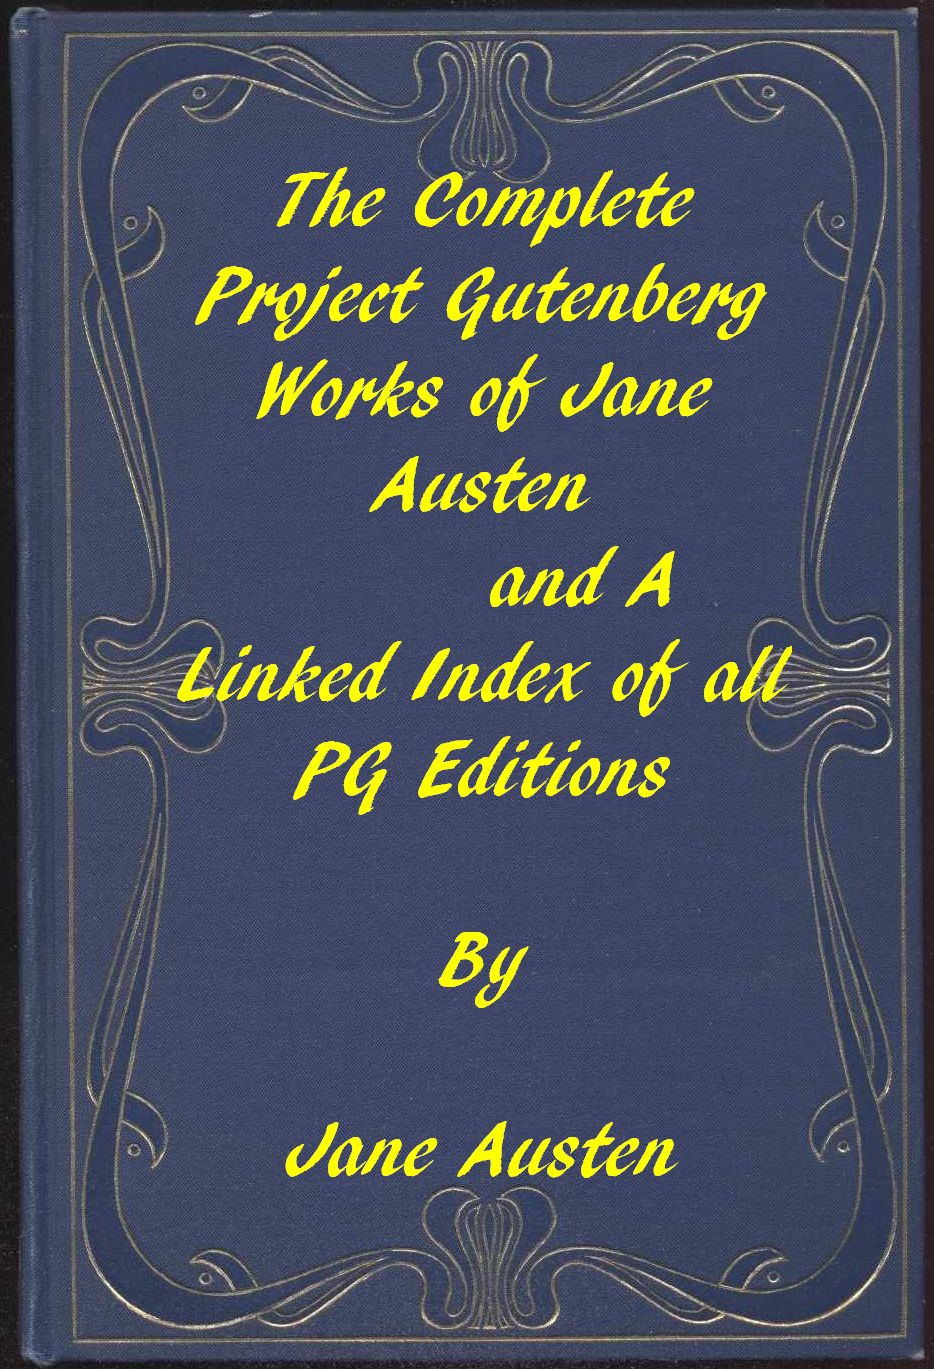 The Complete Project Gutenberg Works of Jane Austen&#10;A Linked Index of all PG Editions of Jane Austen